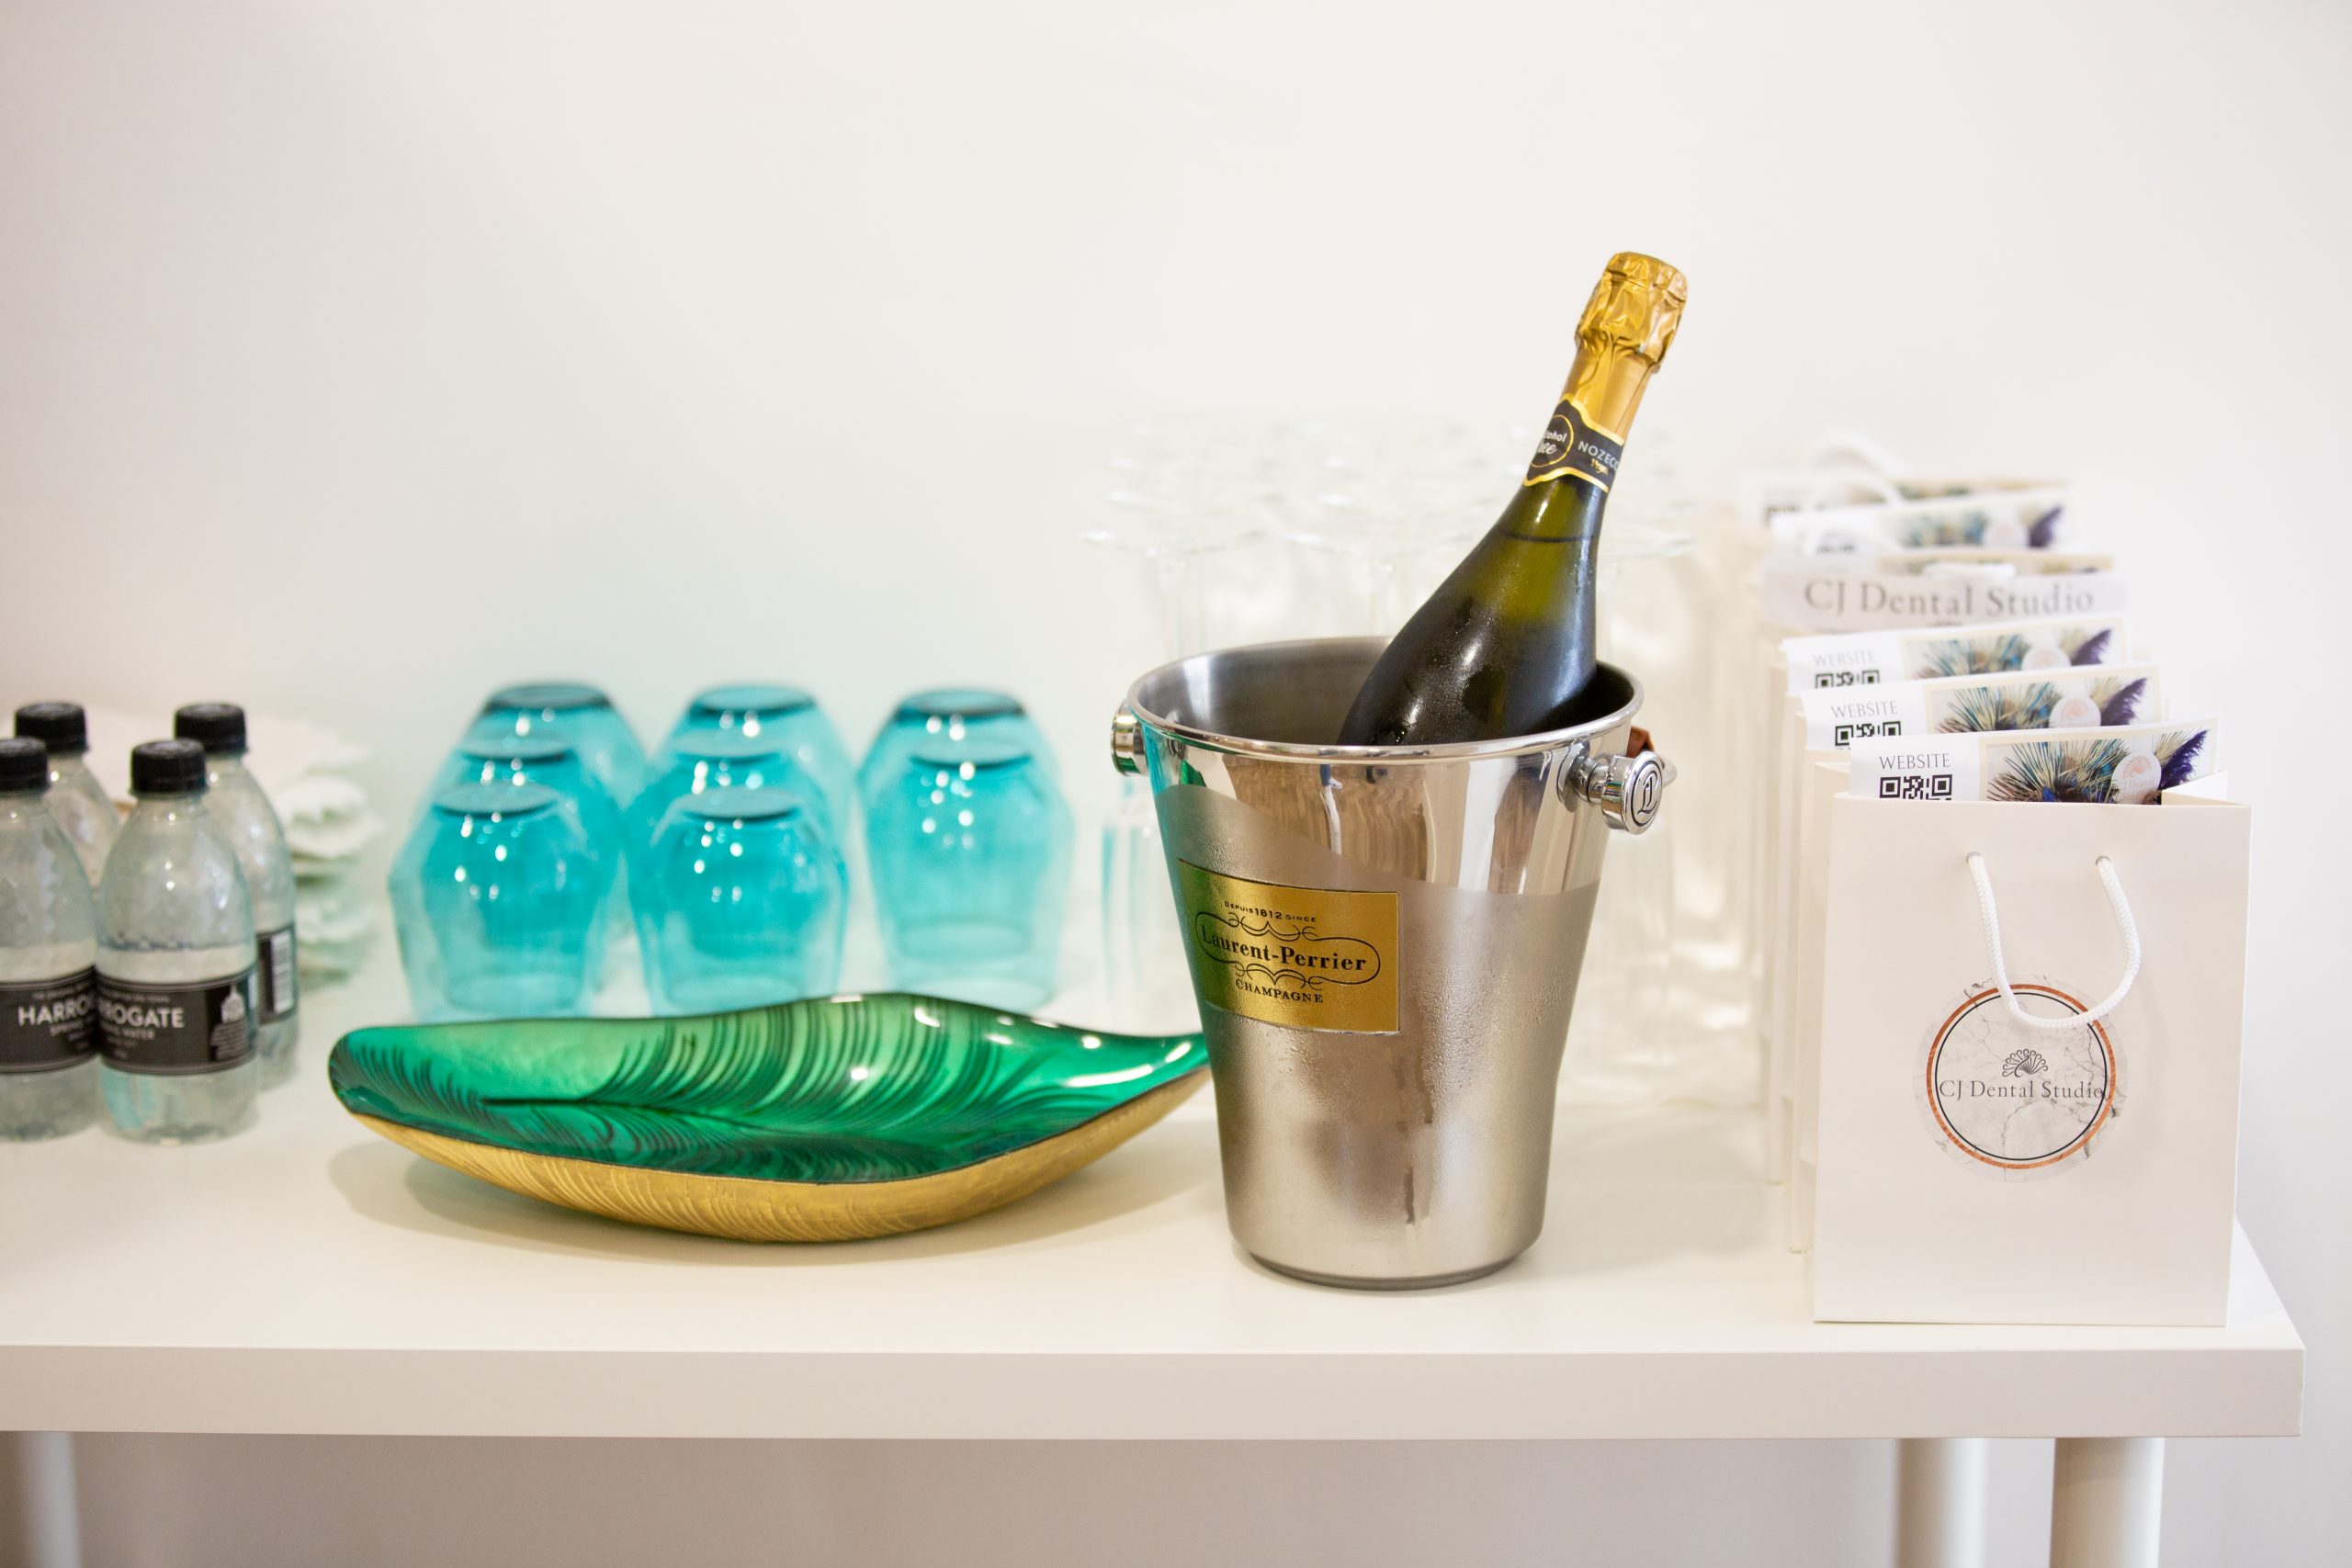 CJ Dental Studio official opening photo drinks, glasses and goodie bags.